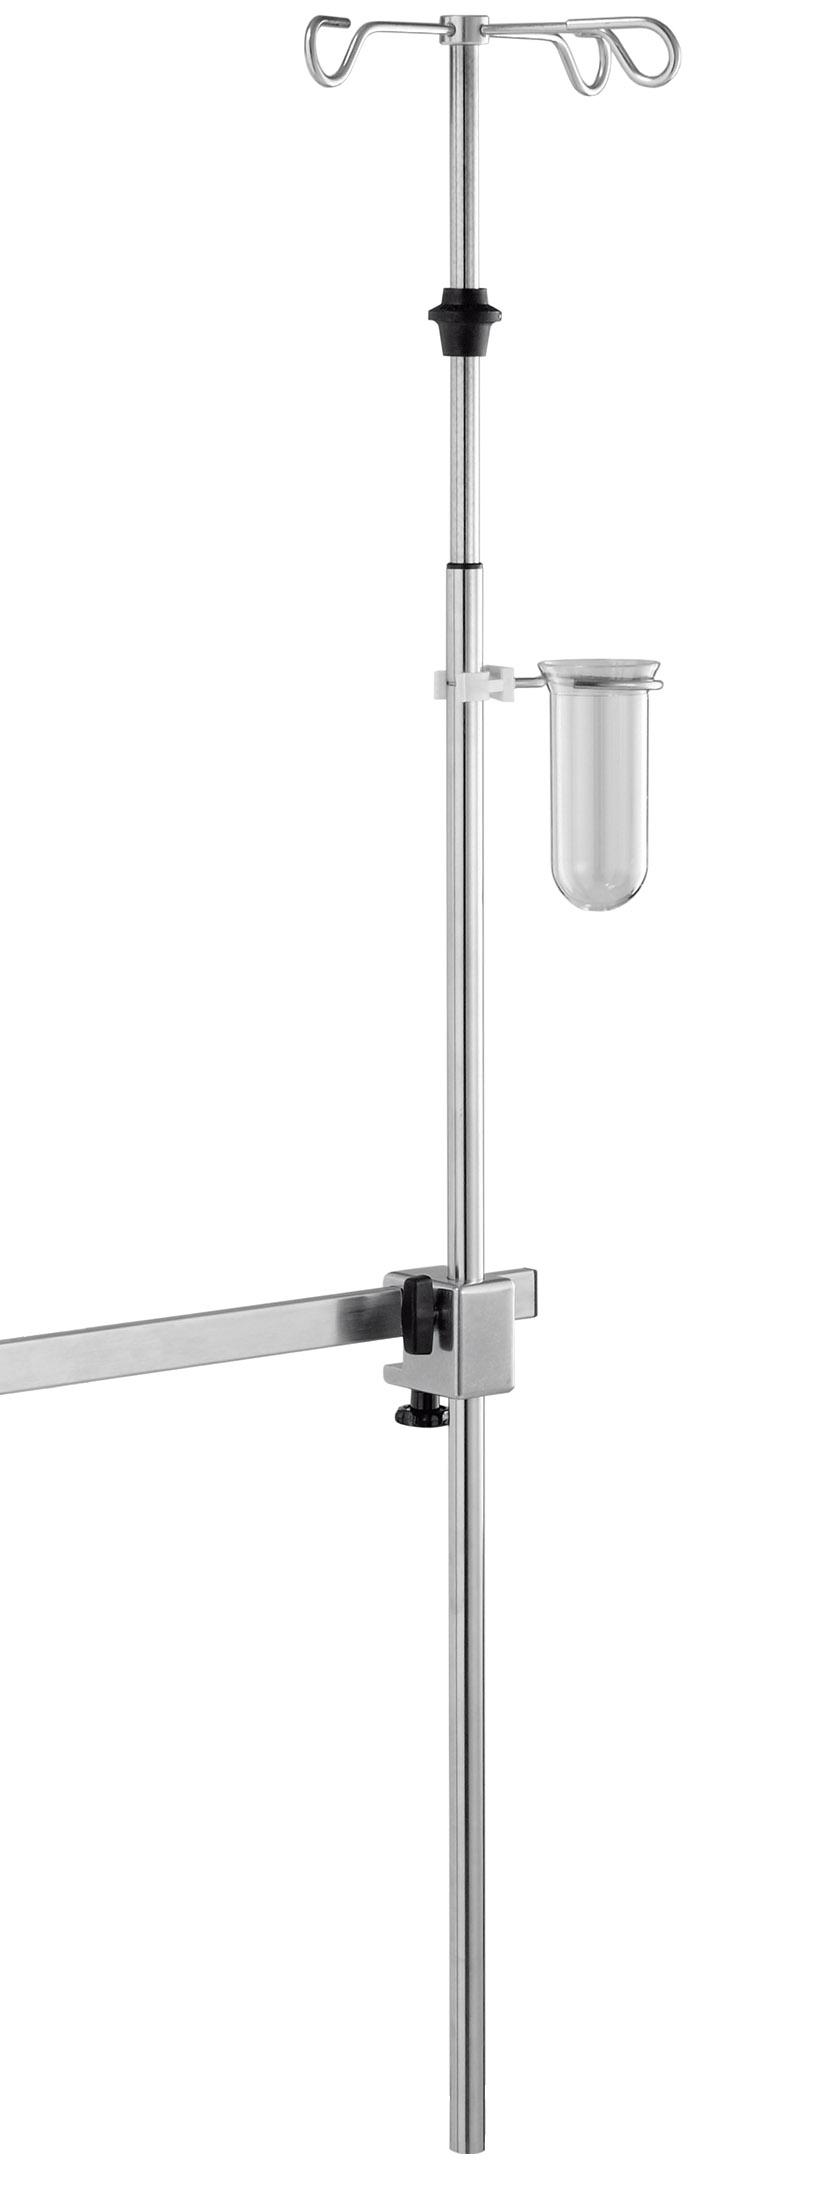 Main photo of the product with name, IV-Pole for wall rail